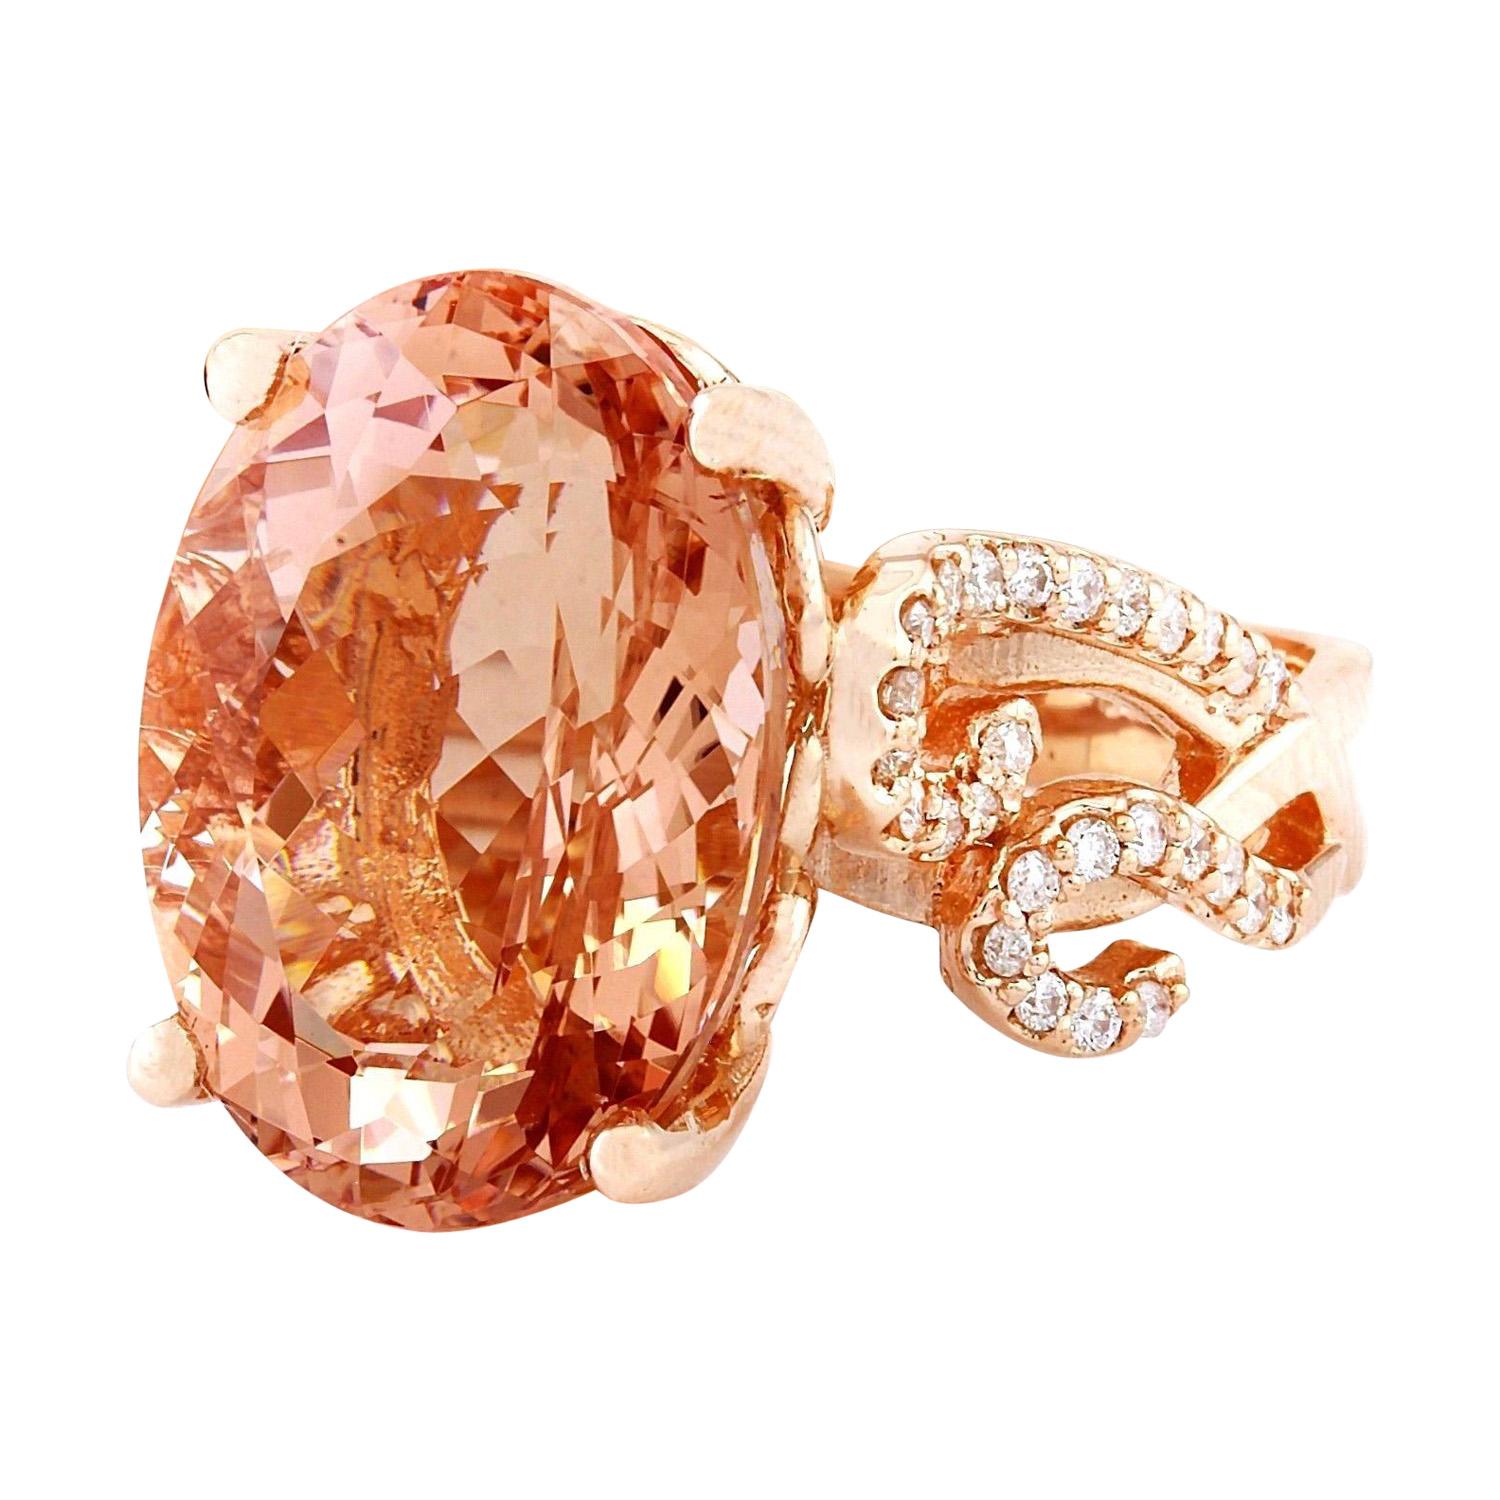 13.39 Carat Natural Morganite 14K Solid Rose Gold Diamond Ring
 Item Type: Ring
 Item Style: Cocktail
 Material: 14K Rose Gold
 Mainstone: Morganite
 Stone Color: Peach
 Stone Weight: 13.09 Carat
 Stone Shape: Oval
 Stone Quantity: 1
 Stone